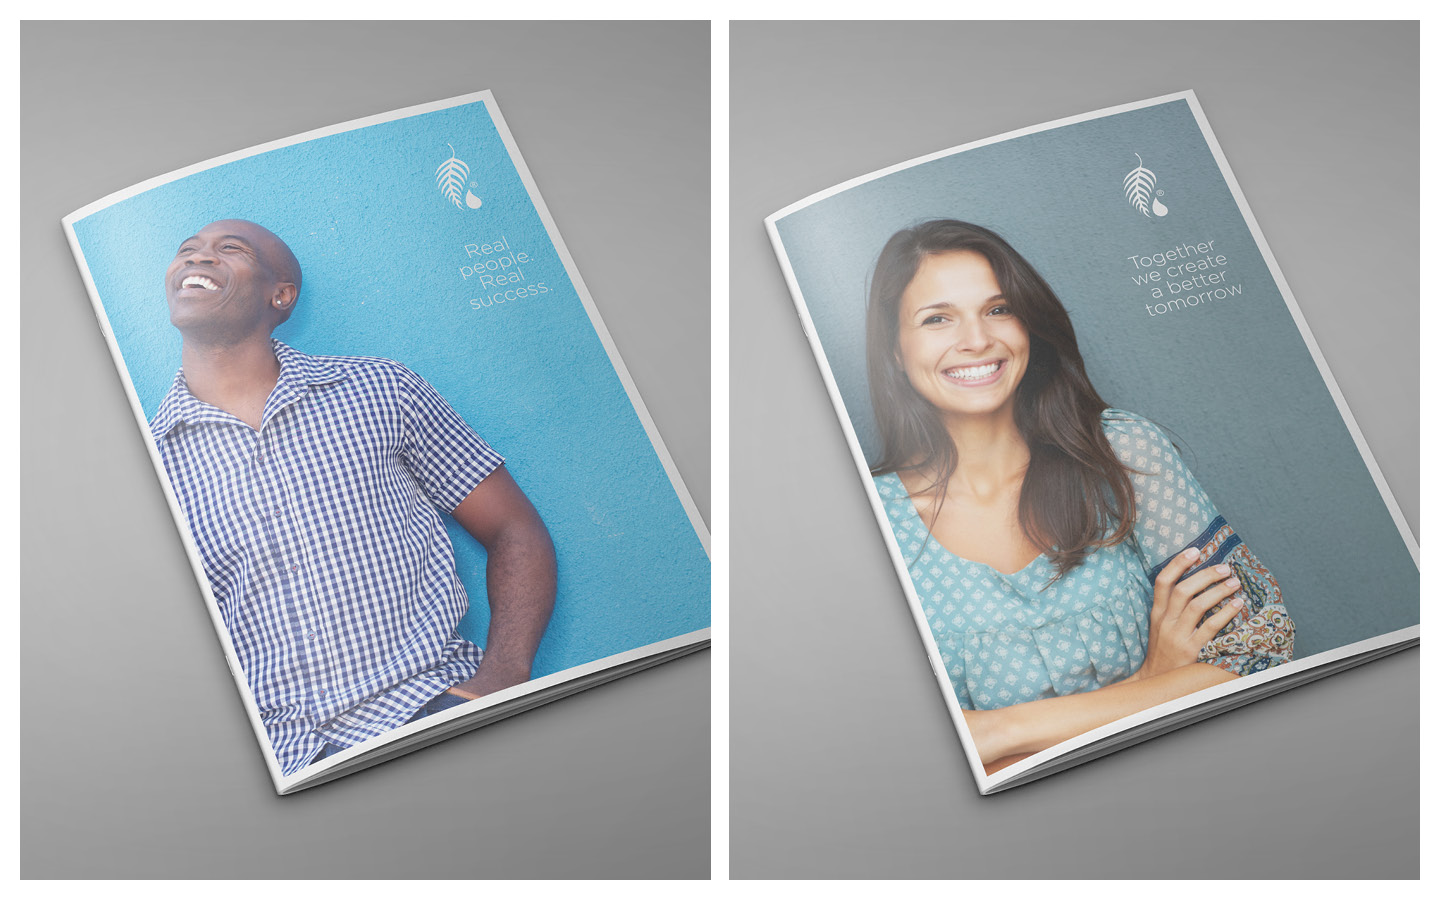 Concepts for New Customer Welcome Books